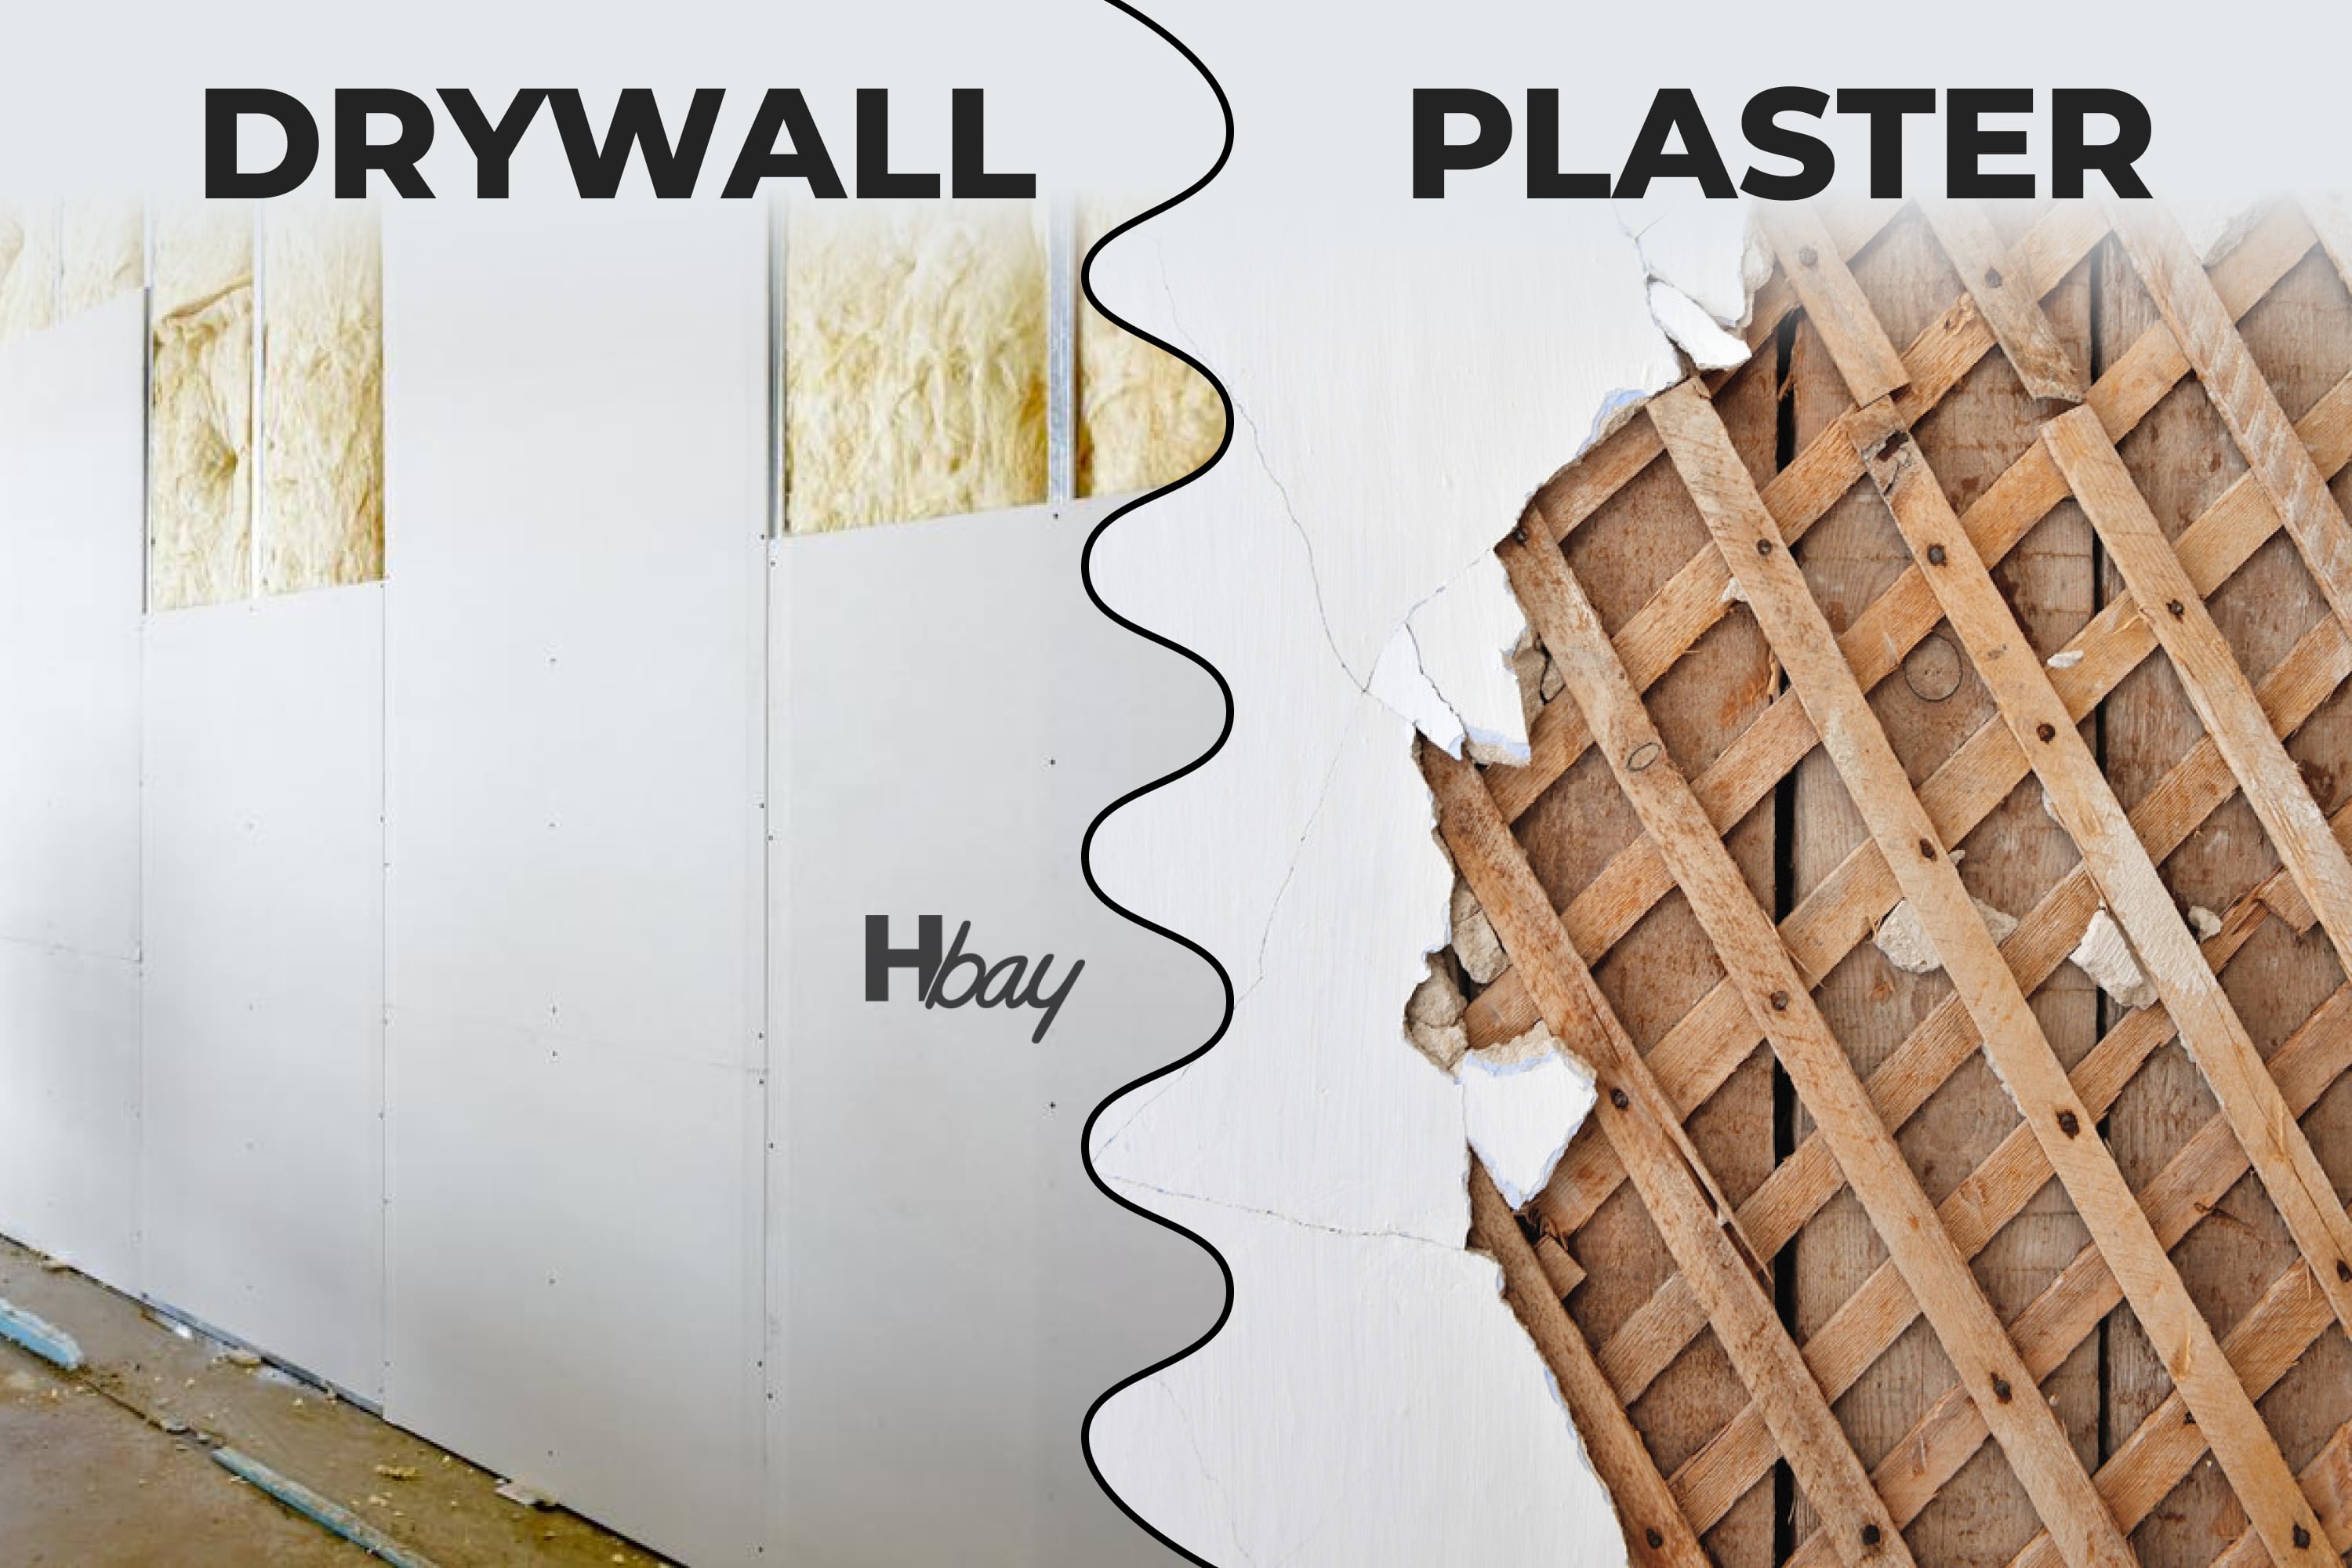 Drywall and plaster. Differences